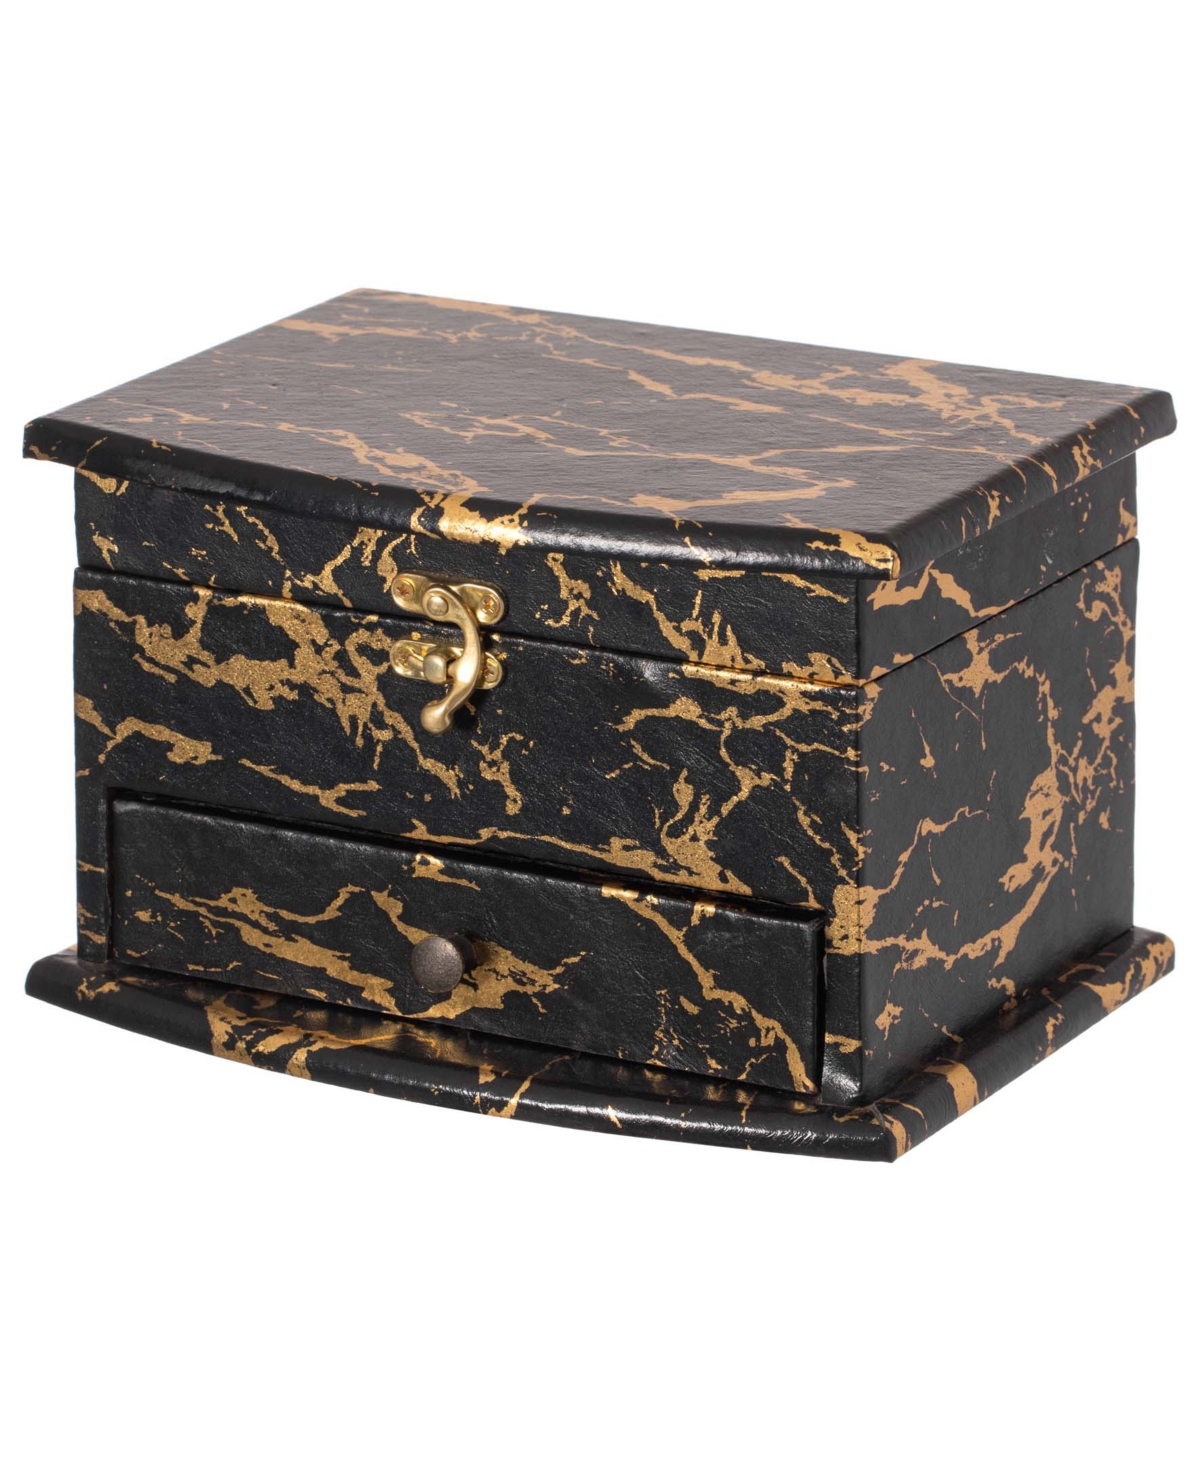 Marble Decorative Modern Wooden Jewelry Box Holder with Lining and Drawer - Black